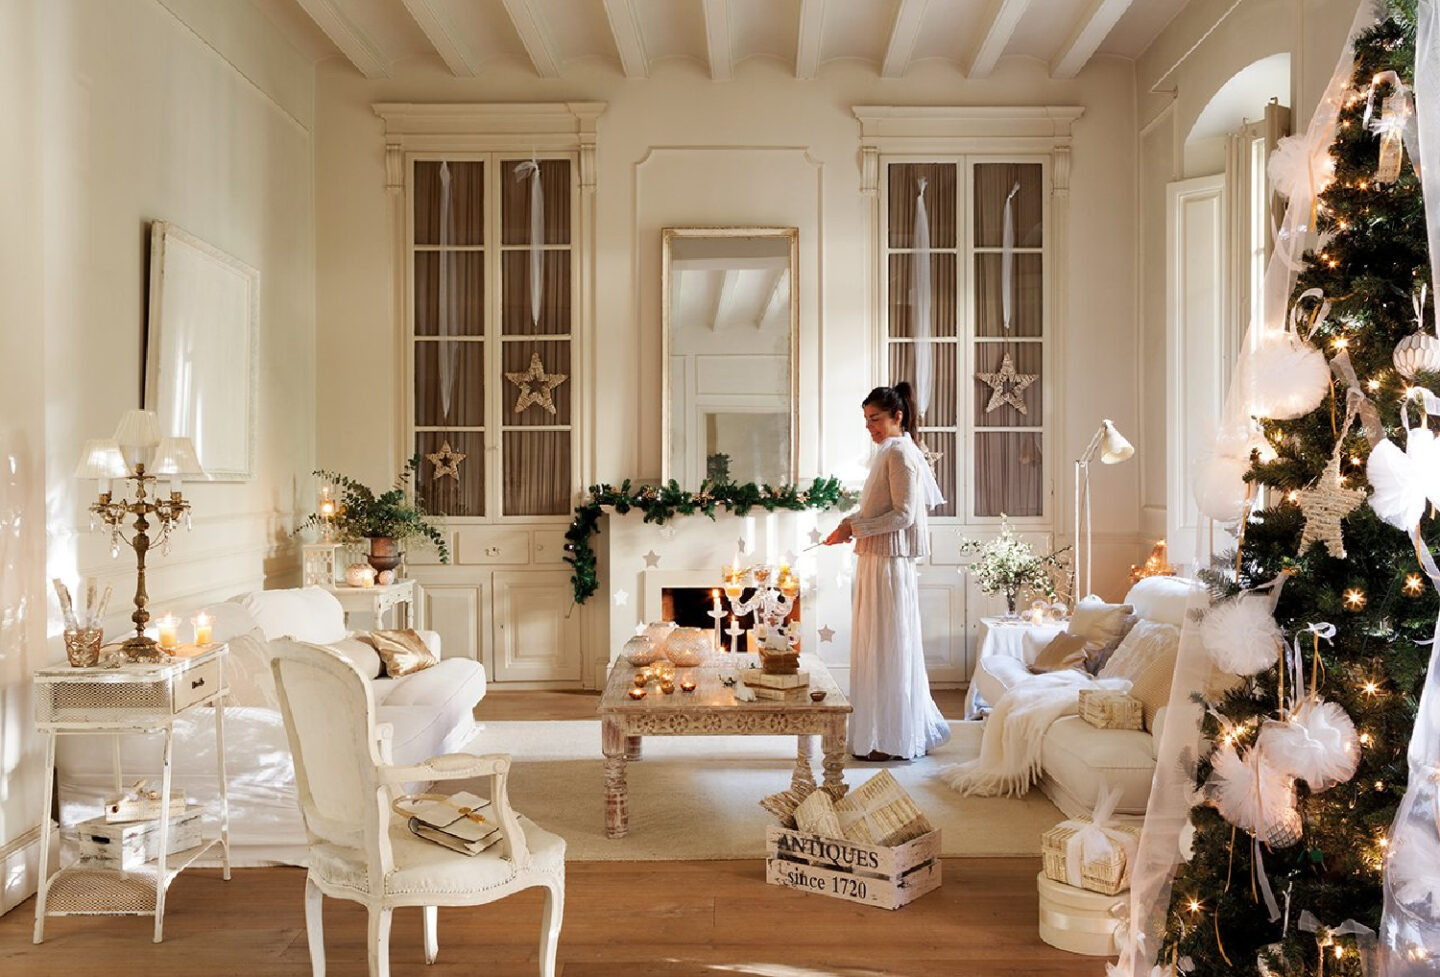 White French country Christmas decor in a Maresme Spain cottage - El Mueble magazine. #frenchcountrychristmas #whitechristmasdecor #nordicchristmas #europeancountry